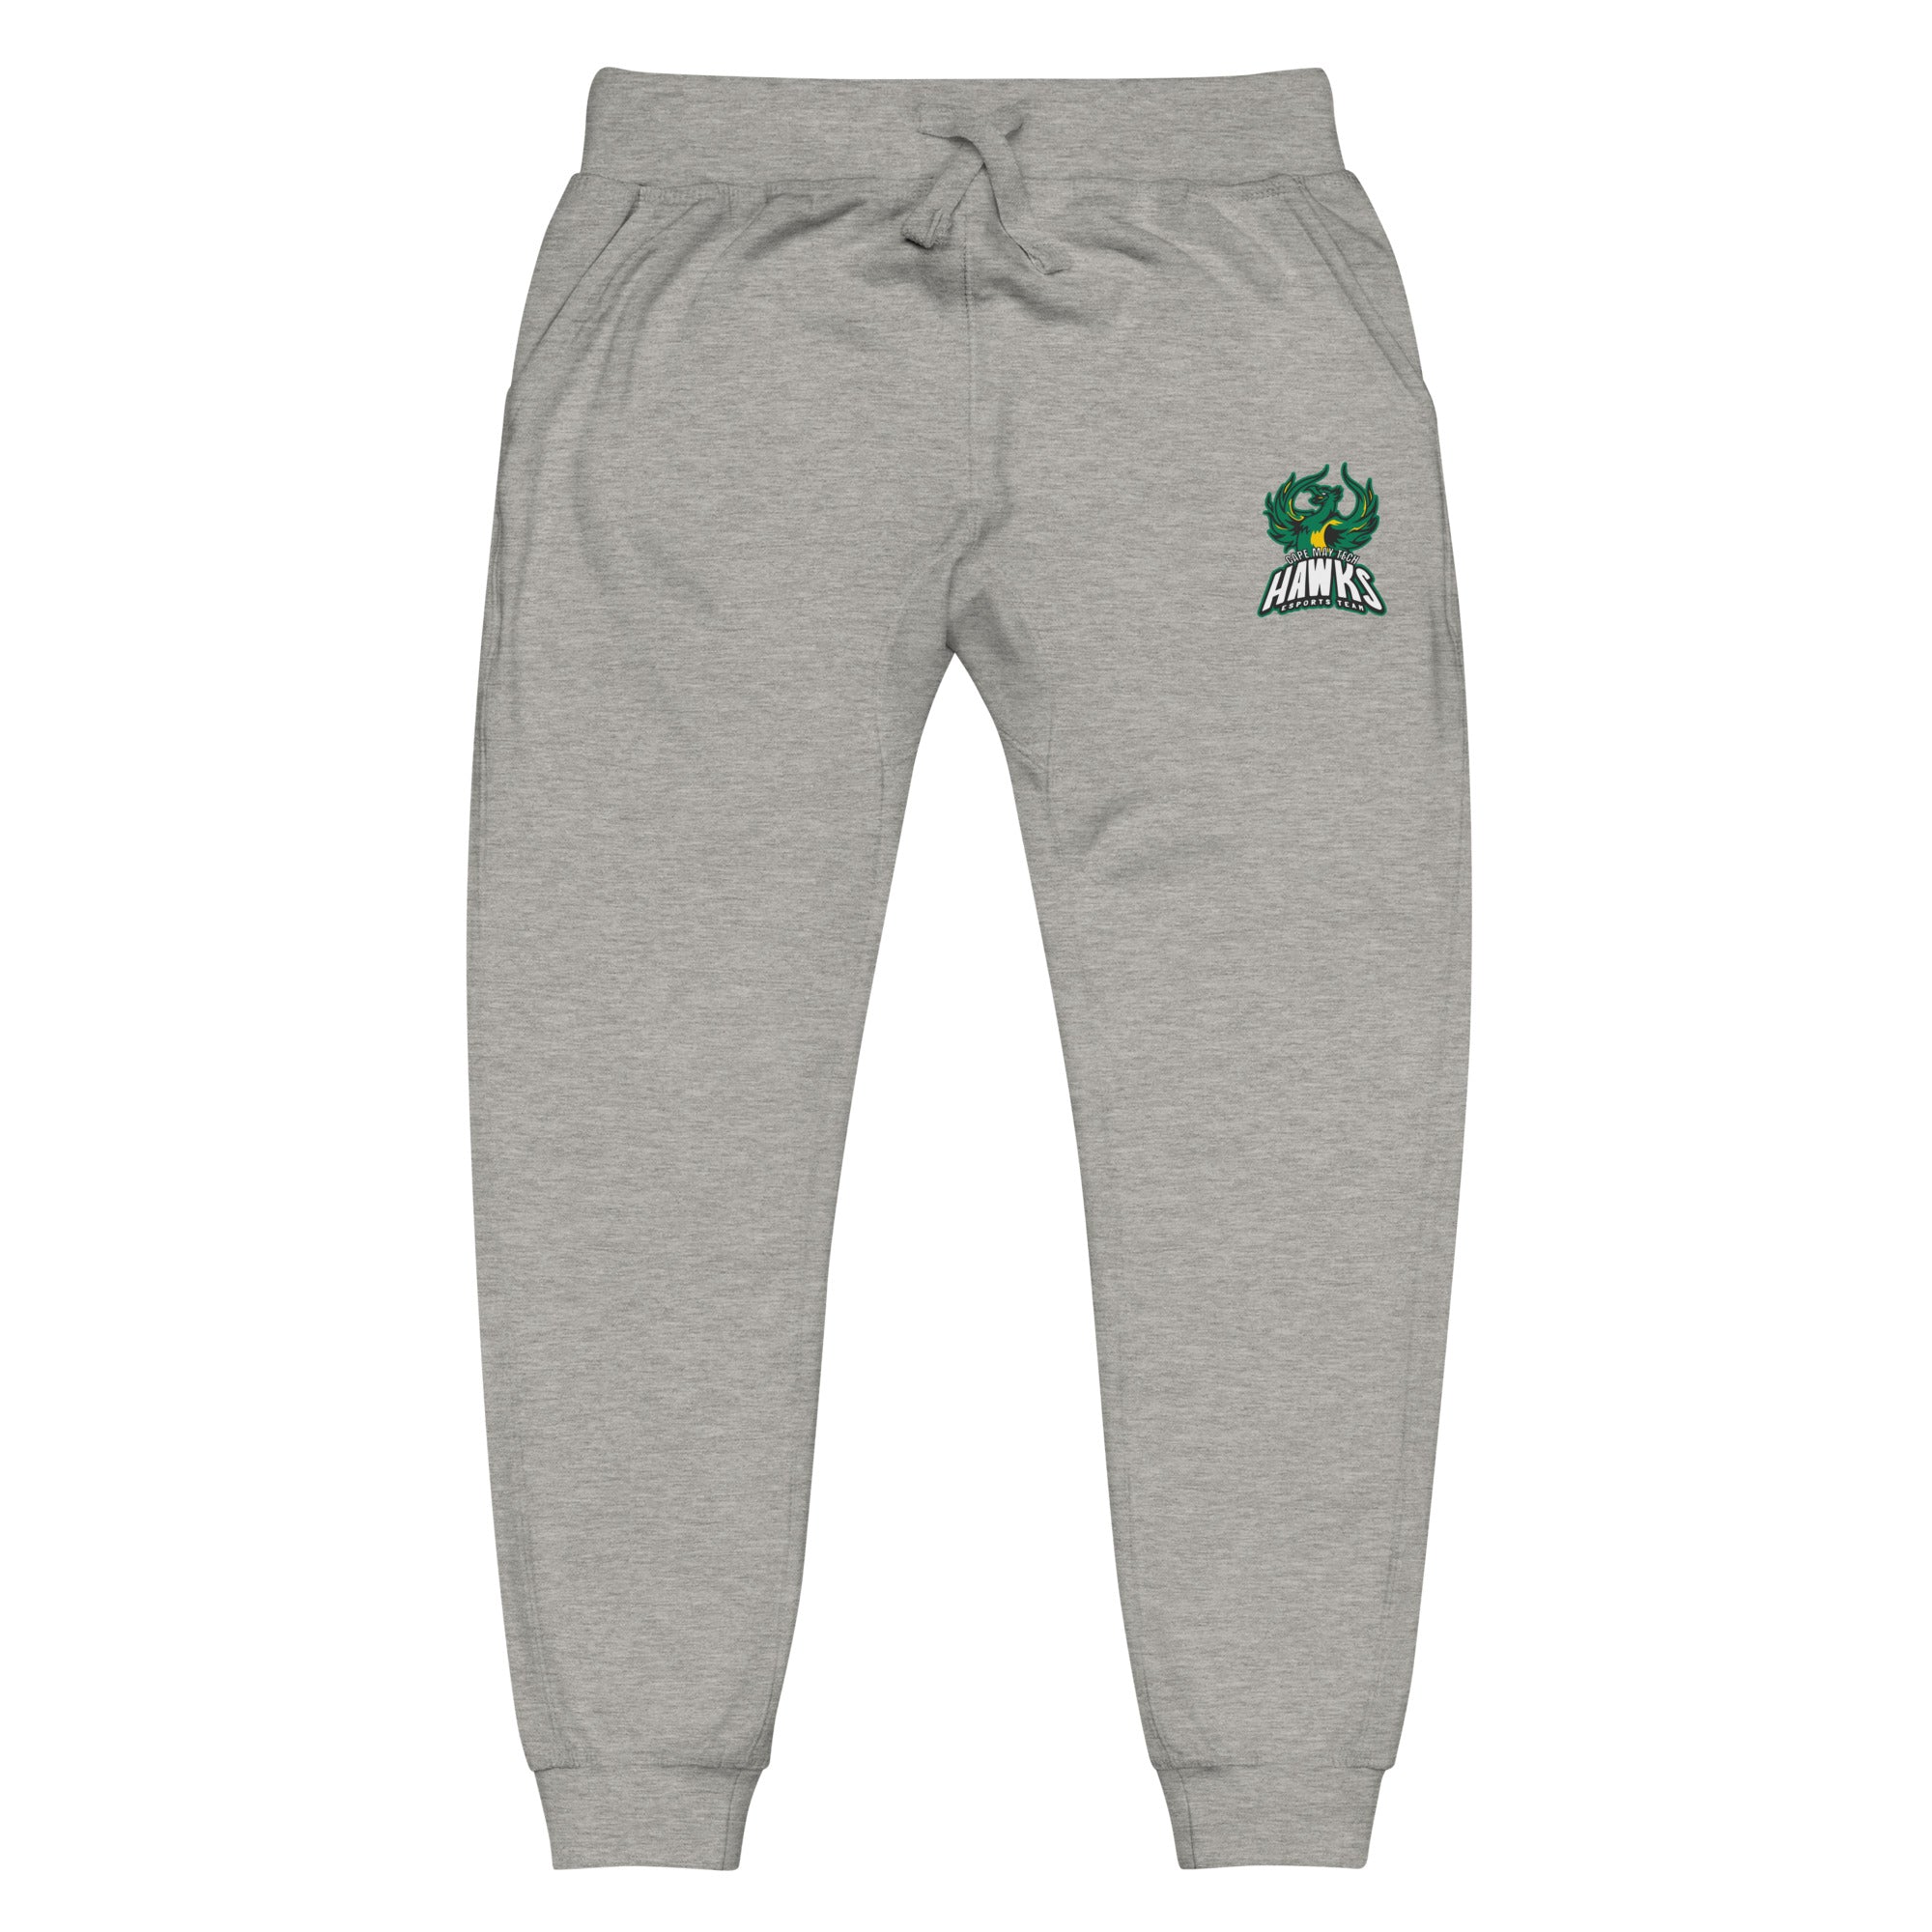 Cape May Technical | On Demand | Embroidered Unisex Fleece Sweatpants